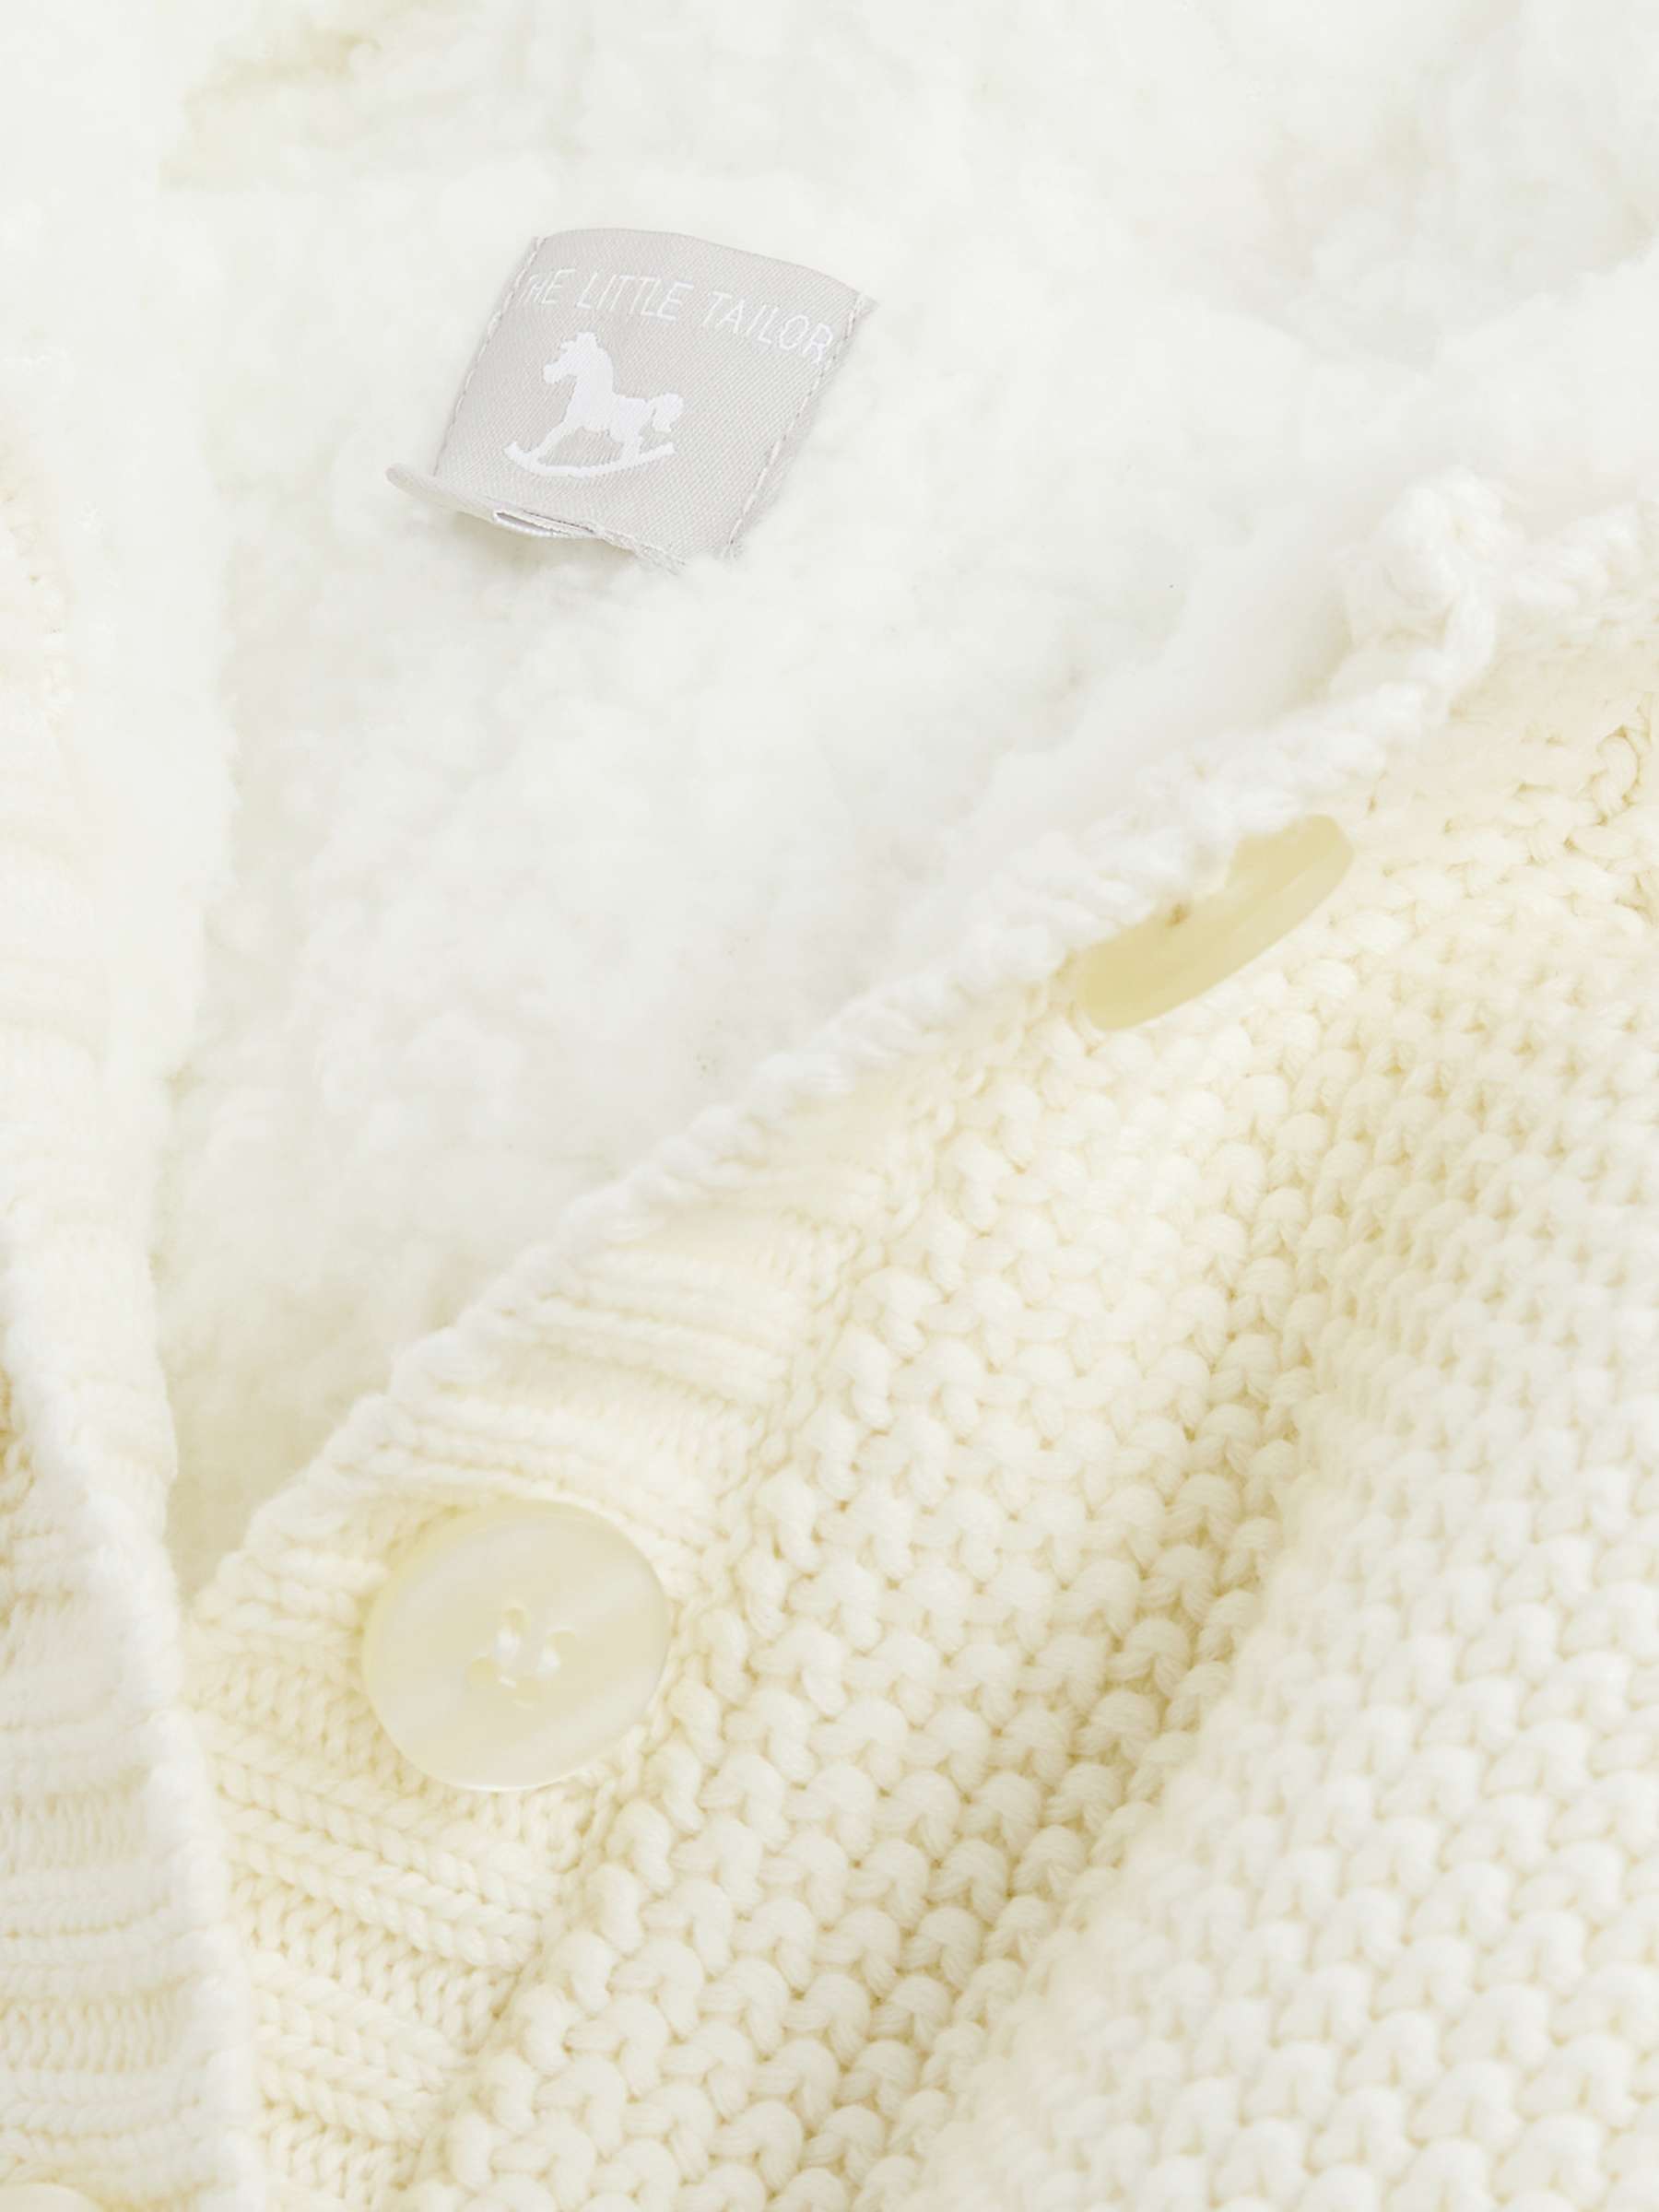 Buy The Little Tailor Plushed Lined Baby Cotton Pom Pom Coat Online at johnlewis.com